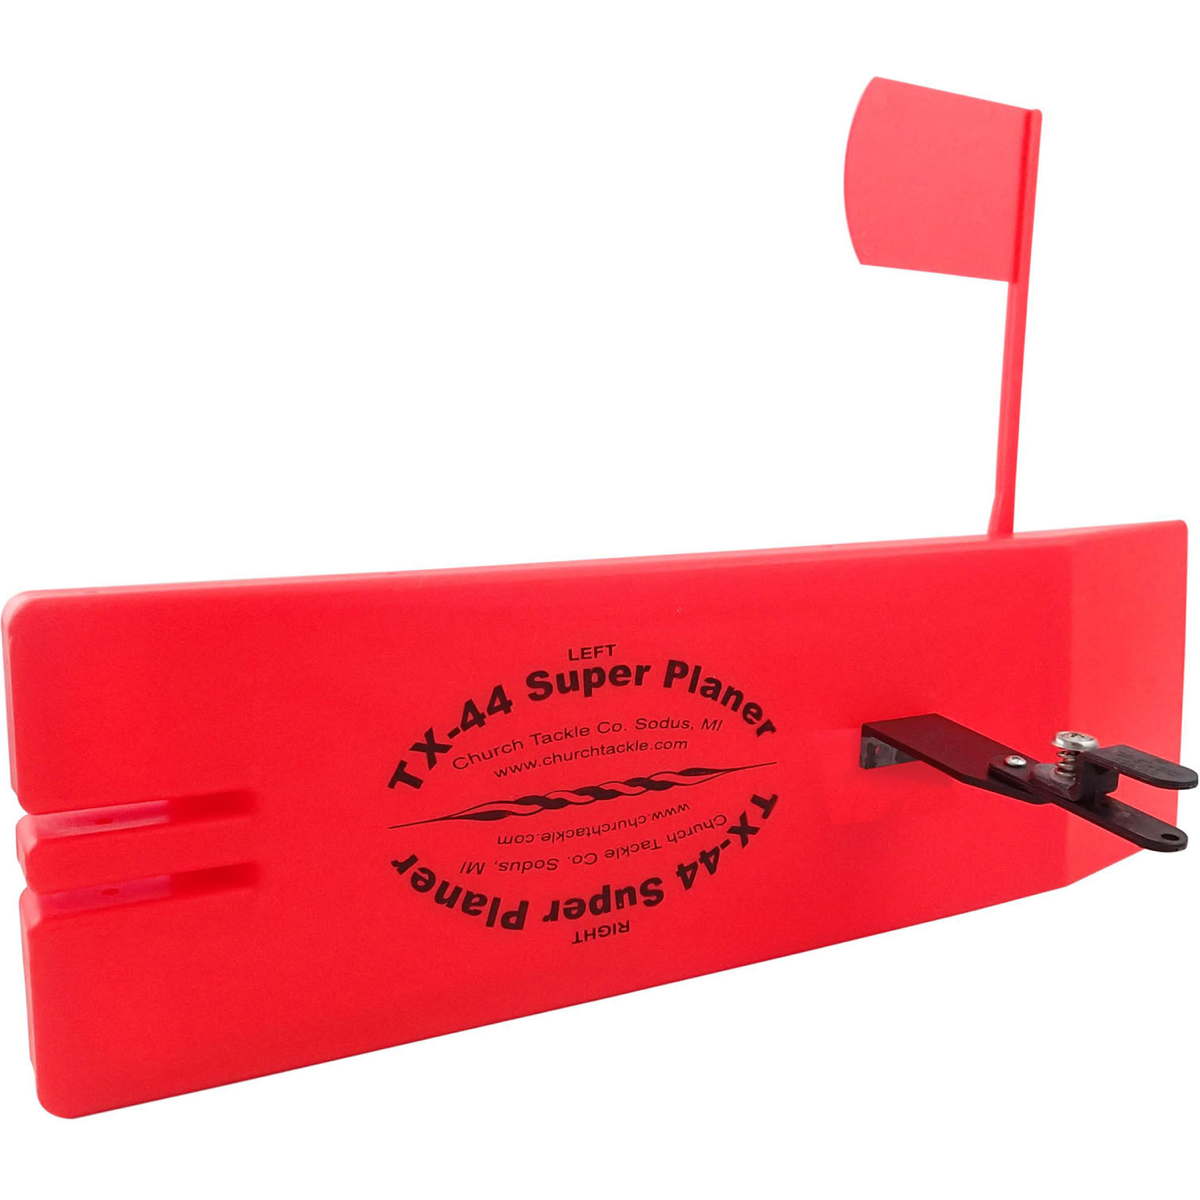 Photo of Church Tackle Super Planer Board for sale at United Tackle Shops.